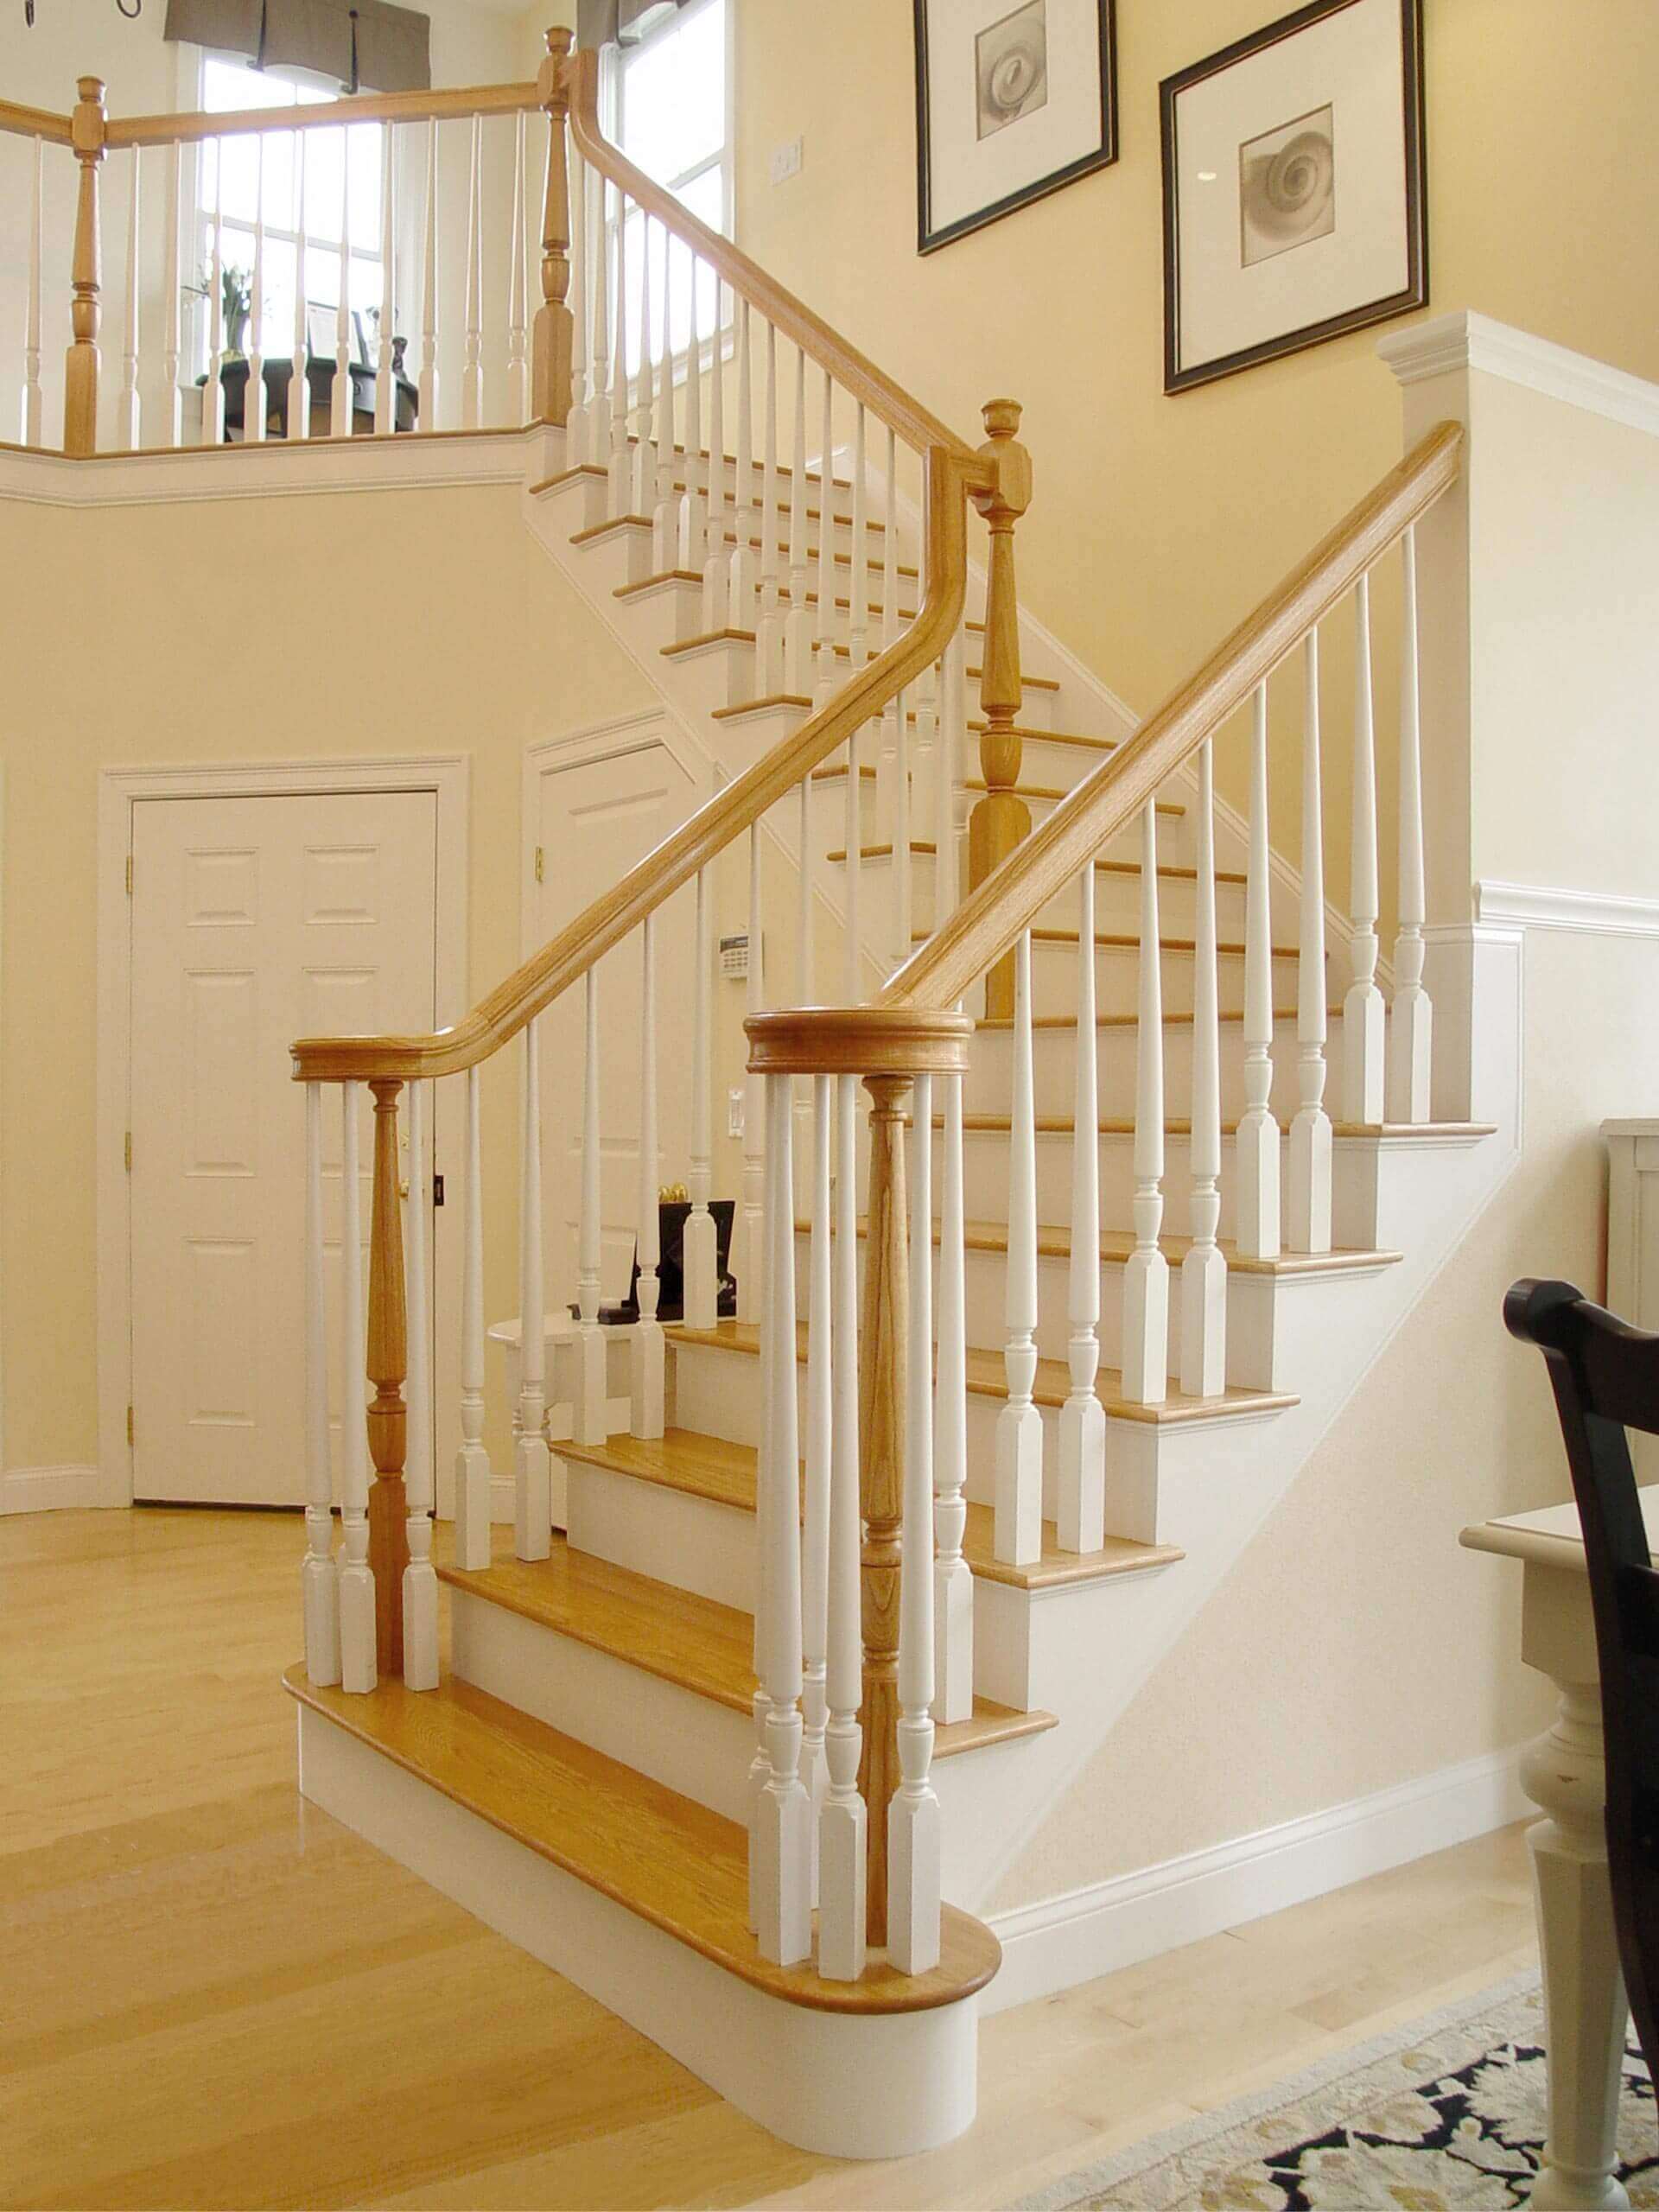 Staircase Terminology - Stair Parts Names